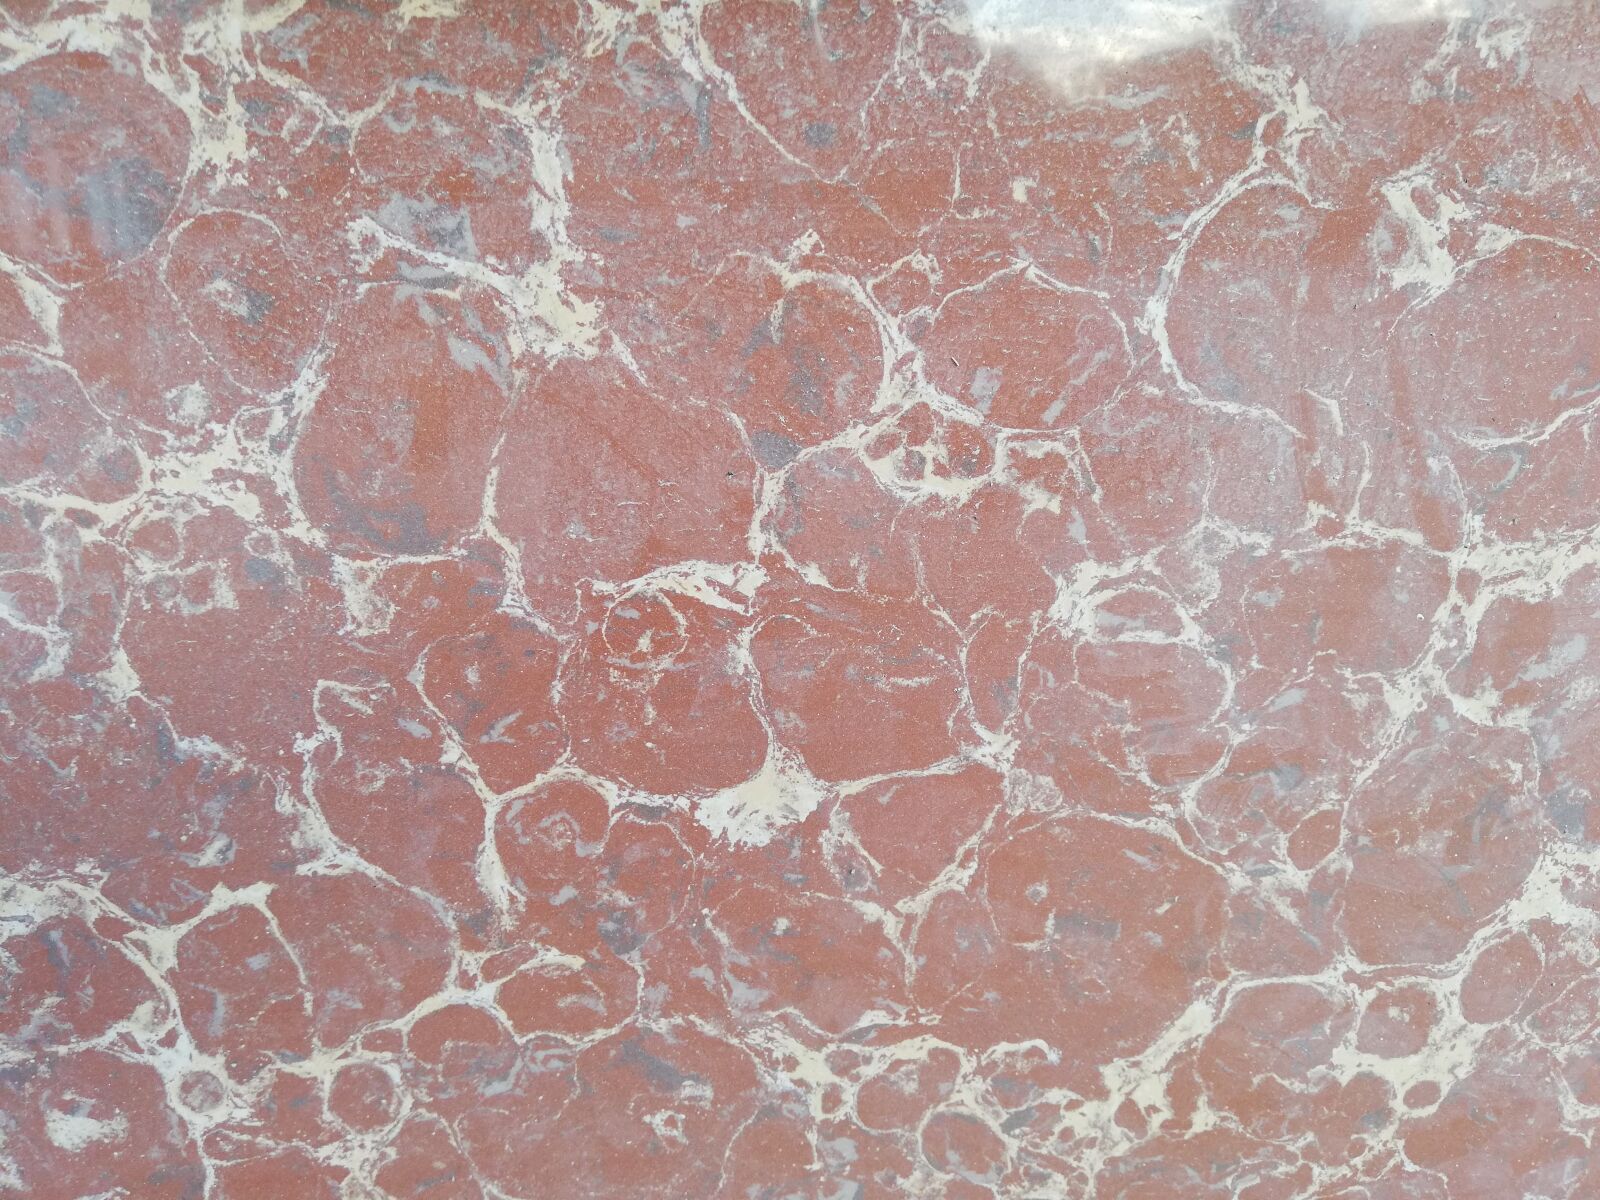 HUAWEI ANE-LX1 sample photo. Stone, background, red photography